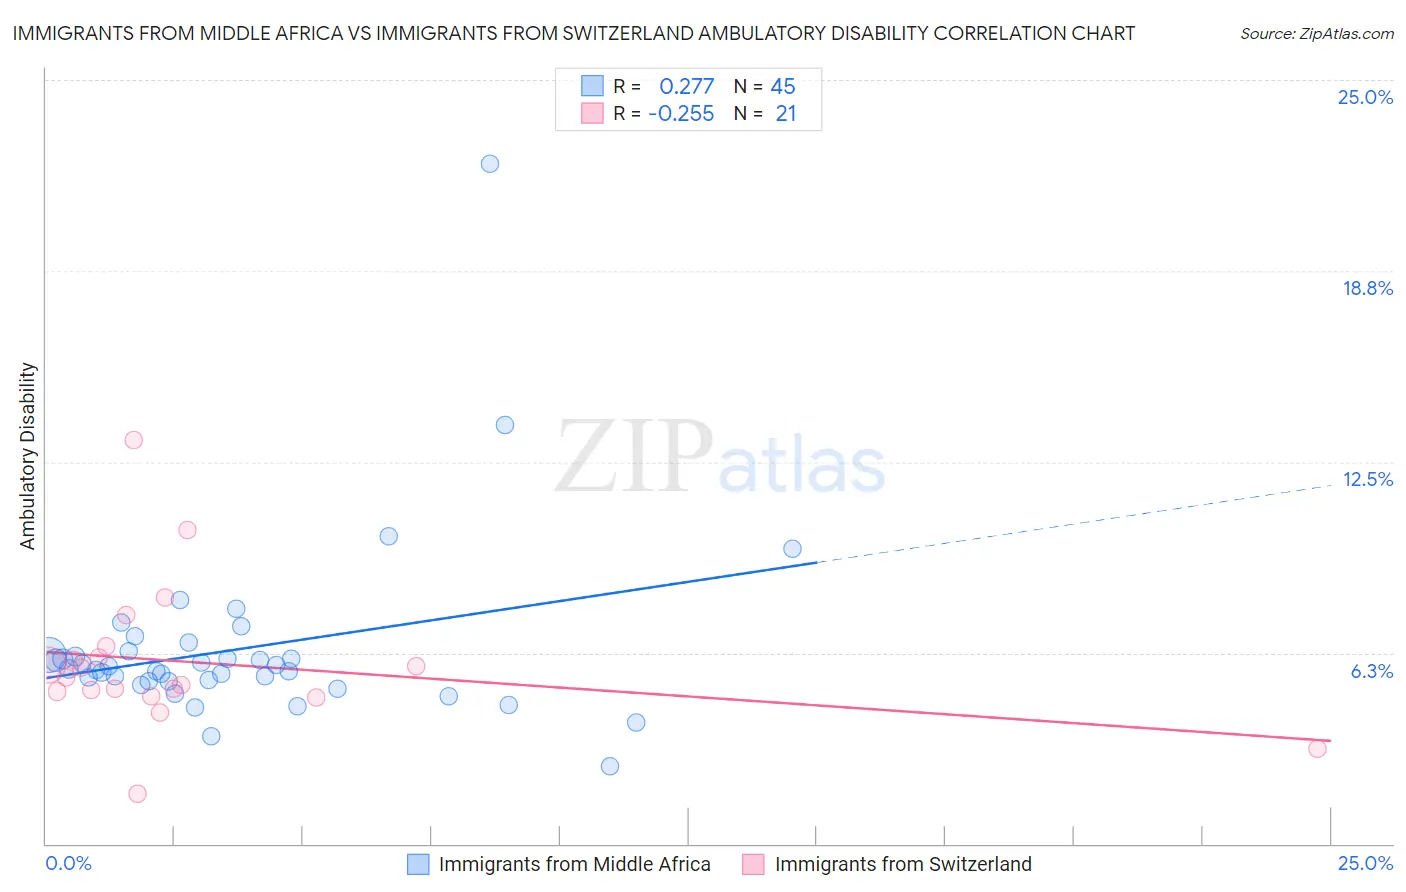 Immigrants from Middle Africa vs Immigrants from Switzerland Ambulatory Disability